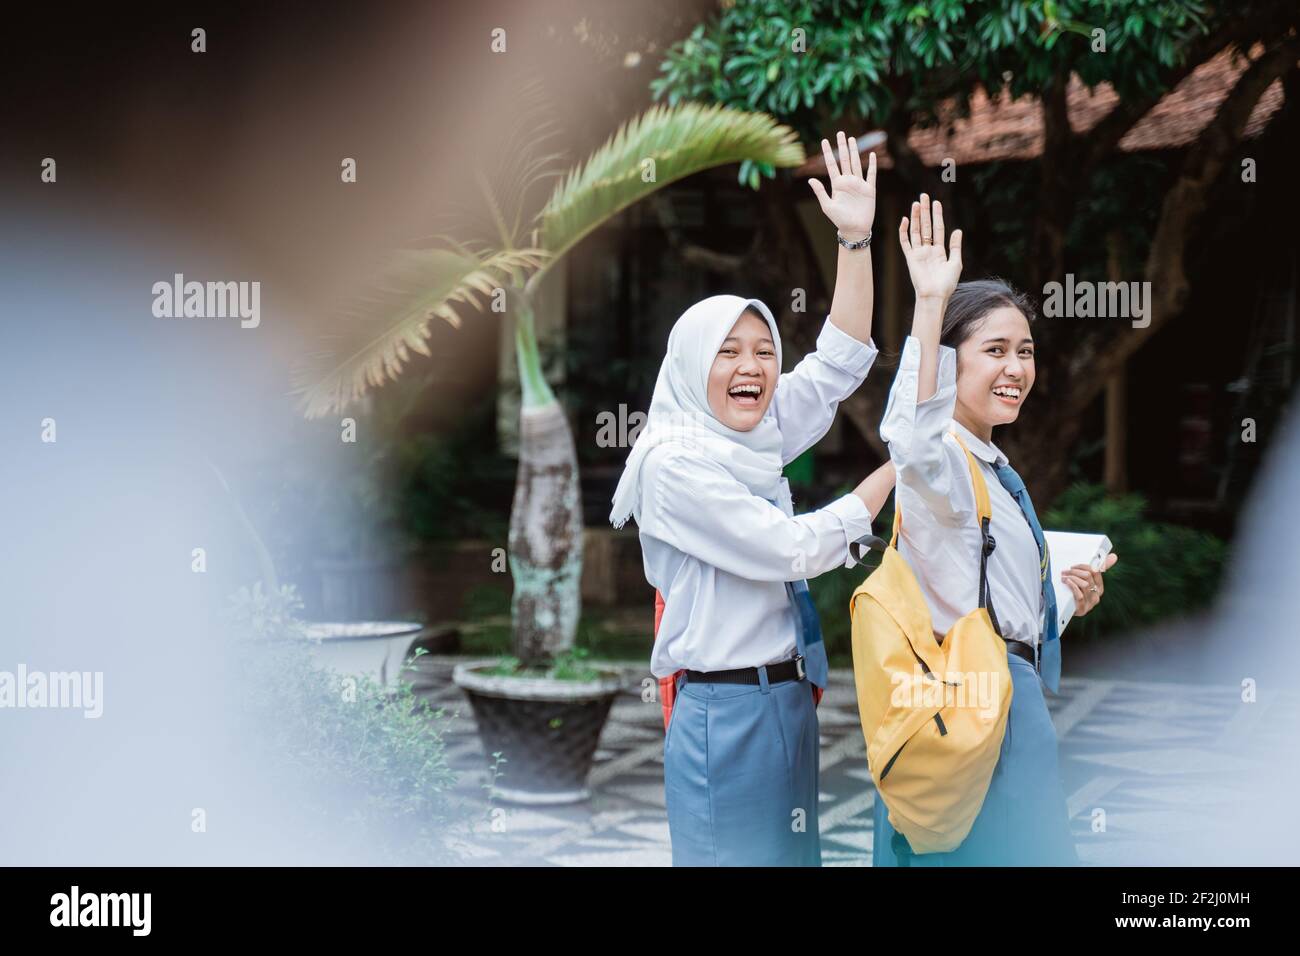 view of a shot from above the back of a high school student with two female high school students wearing school bags waving Stock Photo